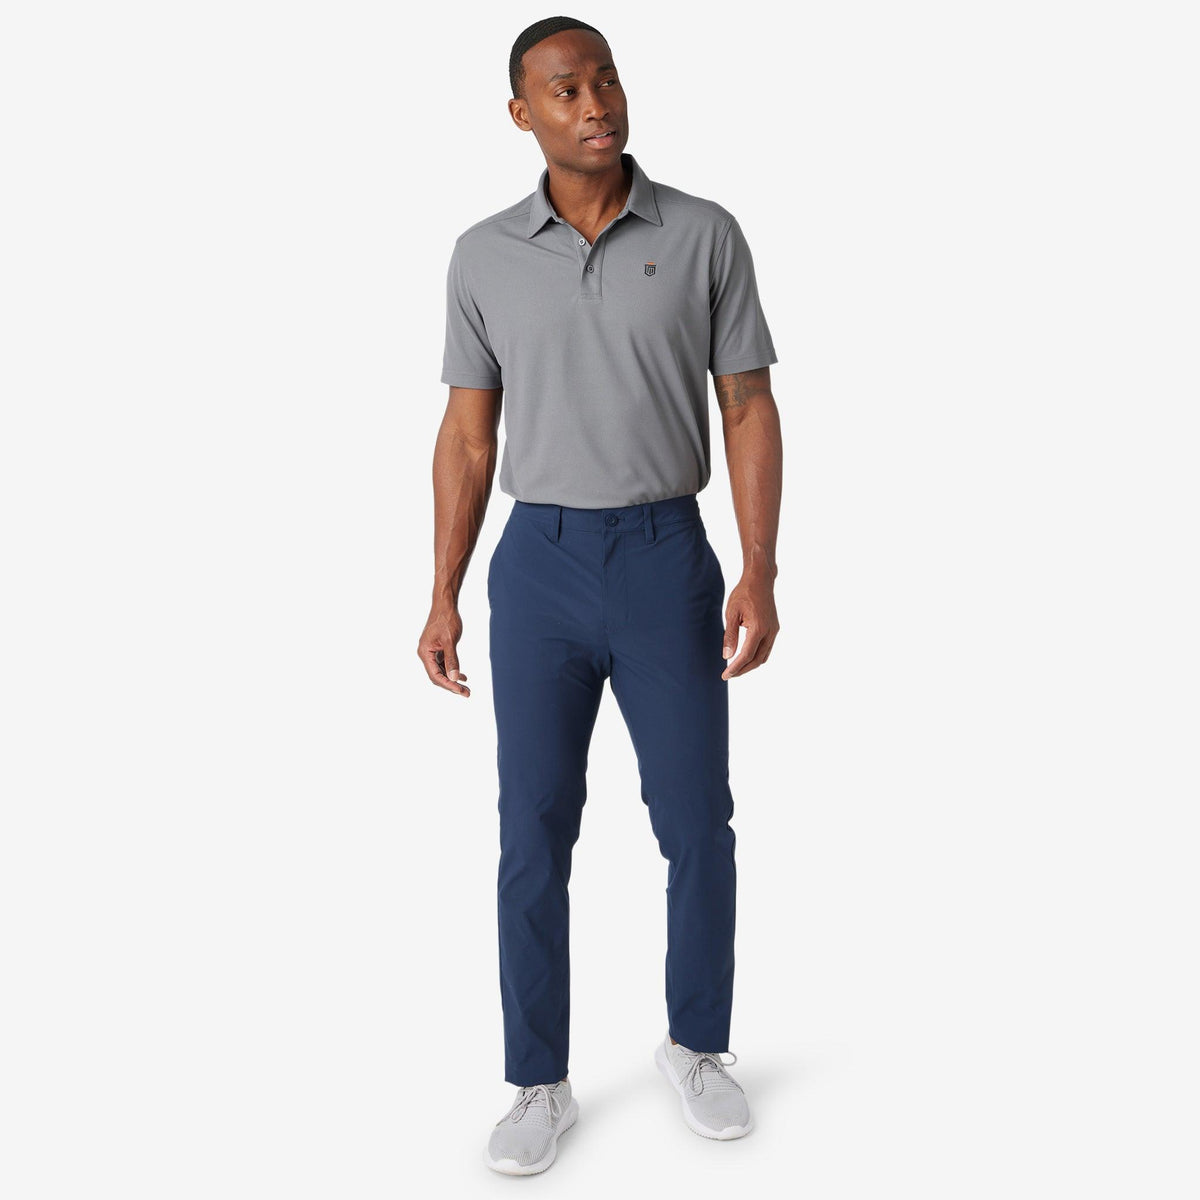 Clubhouse pant Gray 32X30 - Greatness Wins Gray